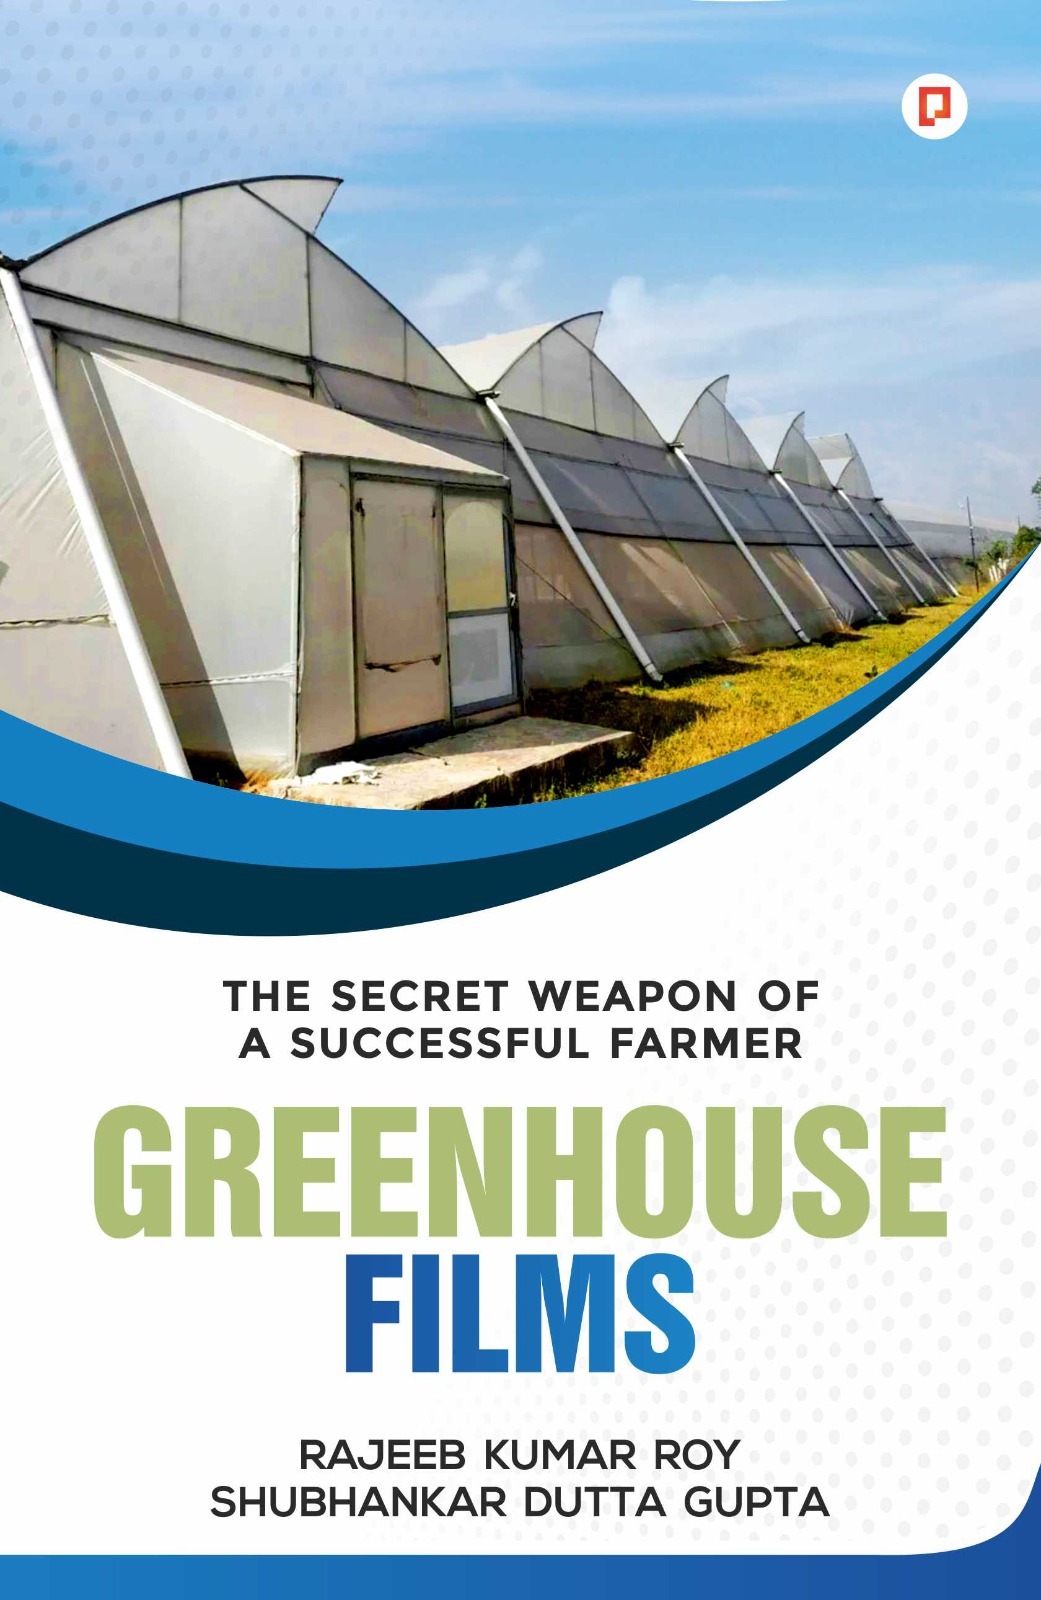 Green house films, agriculture and farming, Science Technology & medicine